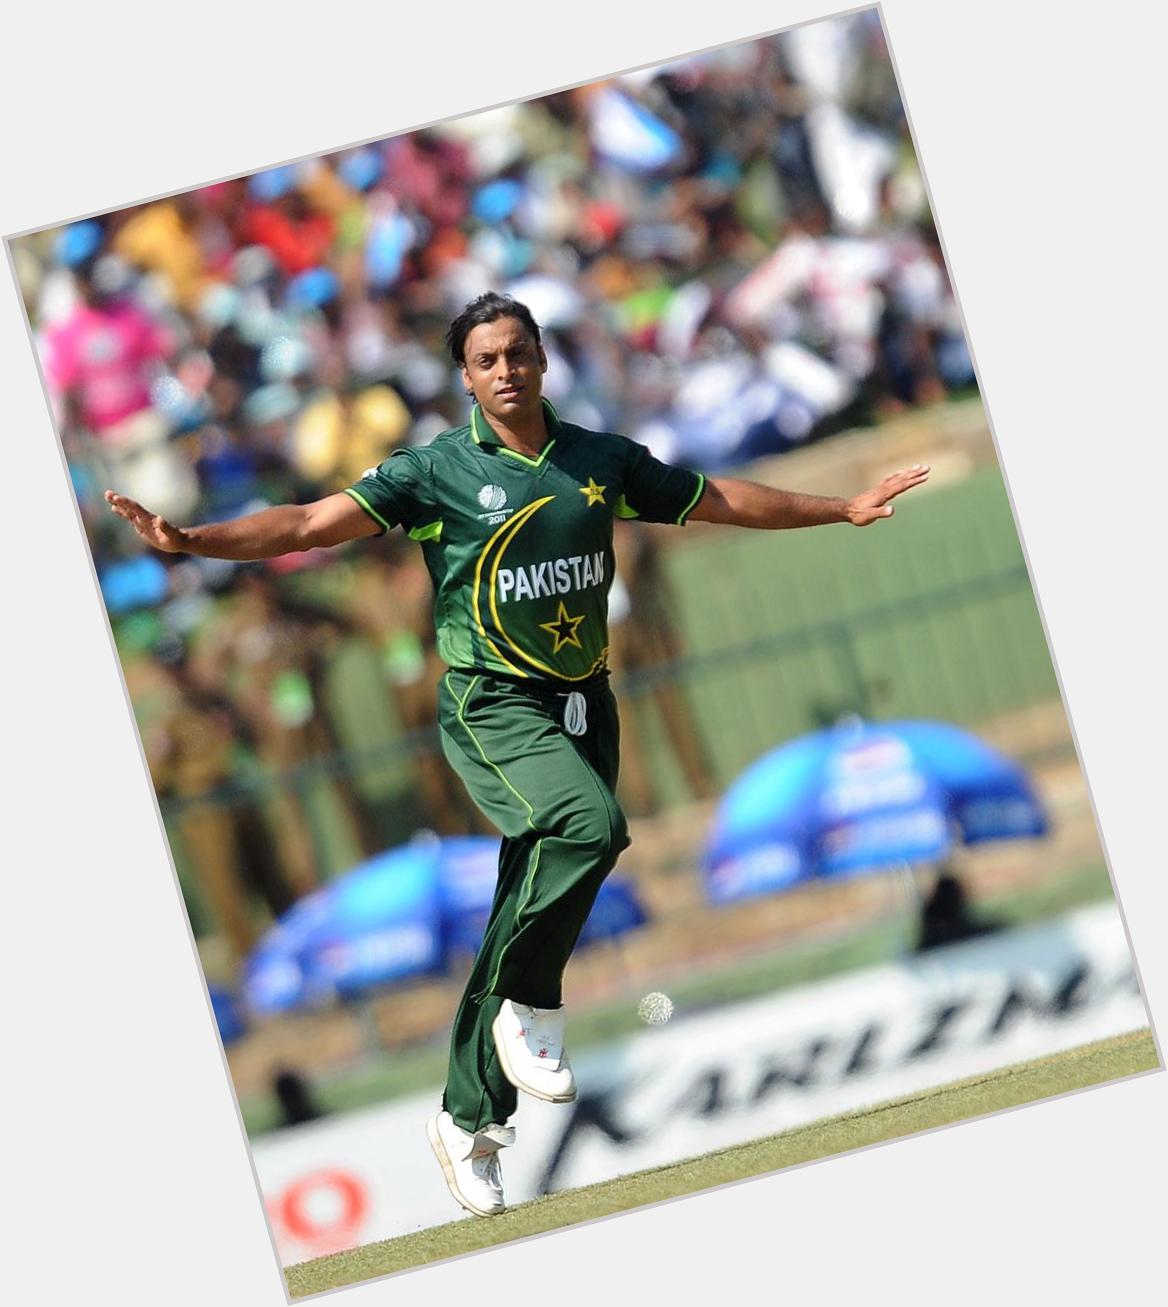 Happy birthday to the fastest bowler in the world the Rawalpindi express, Shoaib Akhtar. 